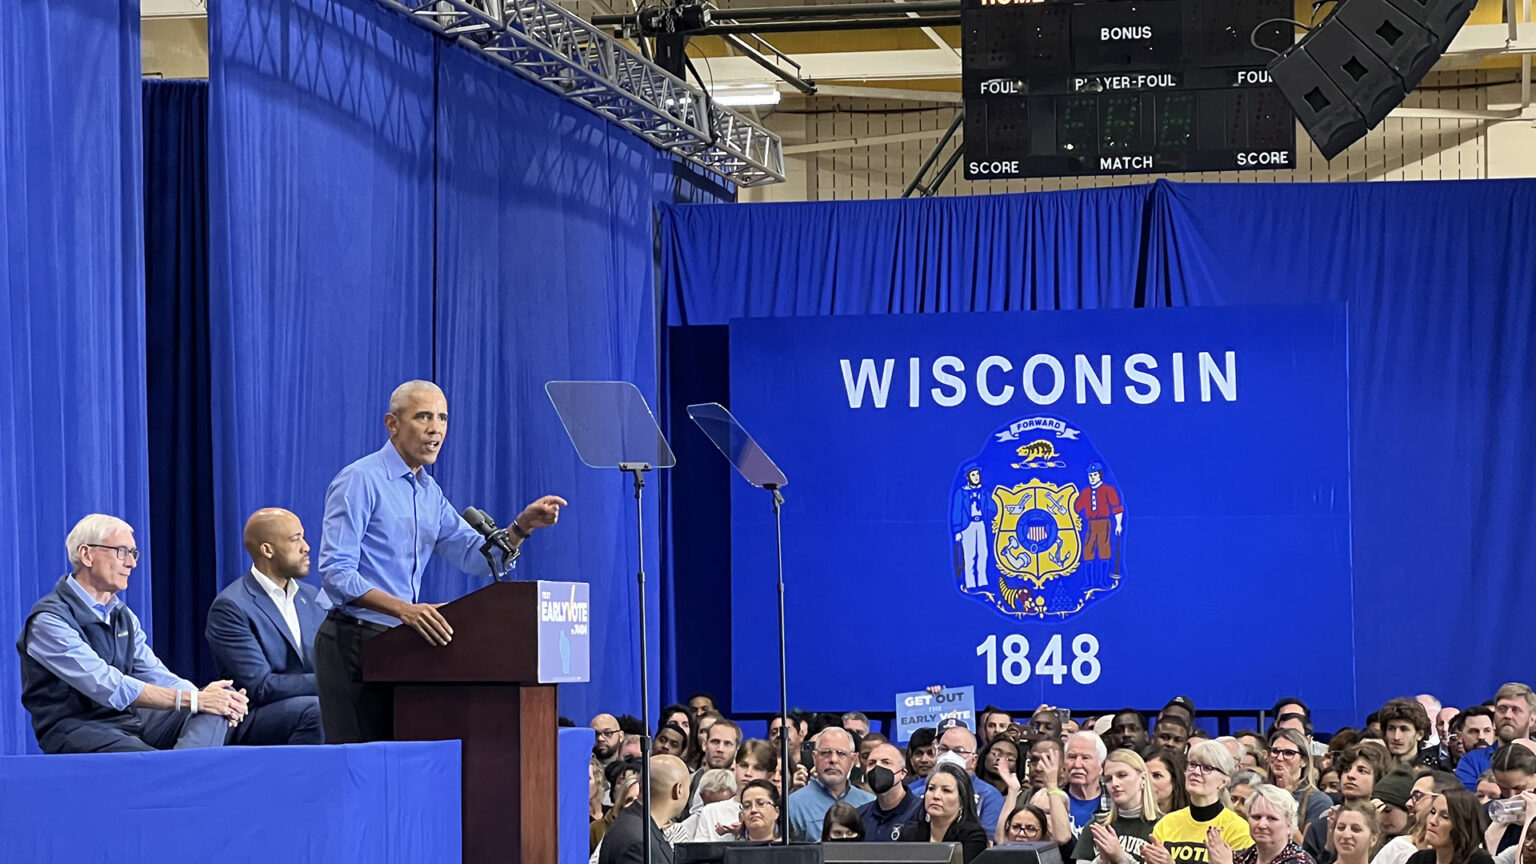 Barack Obama delivers a speech from behind a podium on a stage, with Tony Evers and Mandela Barnes seated behind him, as audience members standing below listen and applaud in a gymnasium with large room-dividing curtains, a Wisconsin flag billboard, and speakers and a scoreboard mounted on the ceiling.